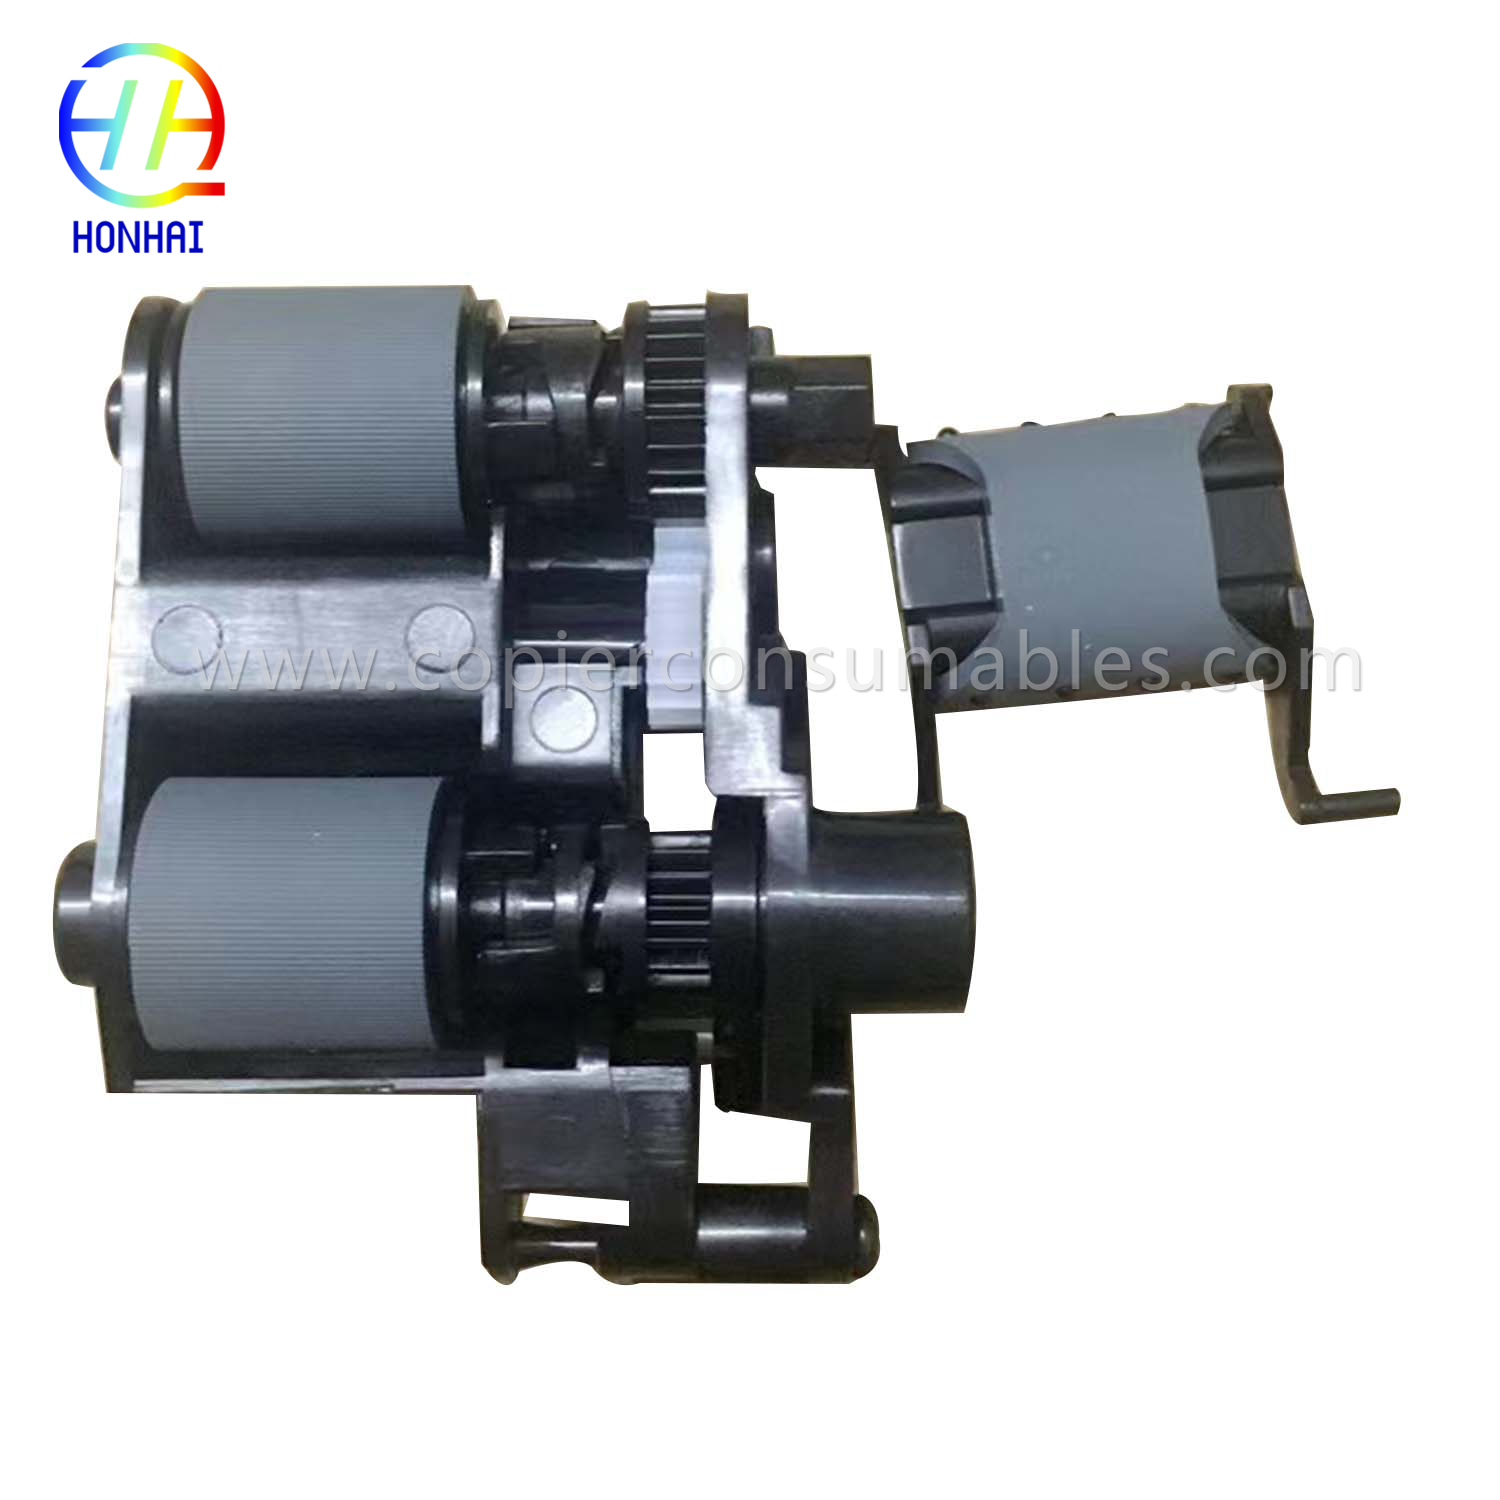 Factory wholesale Lexmark Lower Roller - Adf Feed for HP Cm1415 M1536 P1566 P1606 Cp1525 PRO 100 M175 M176 M177 M276 CE538-60137  – HONHAI